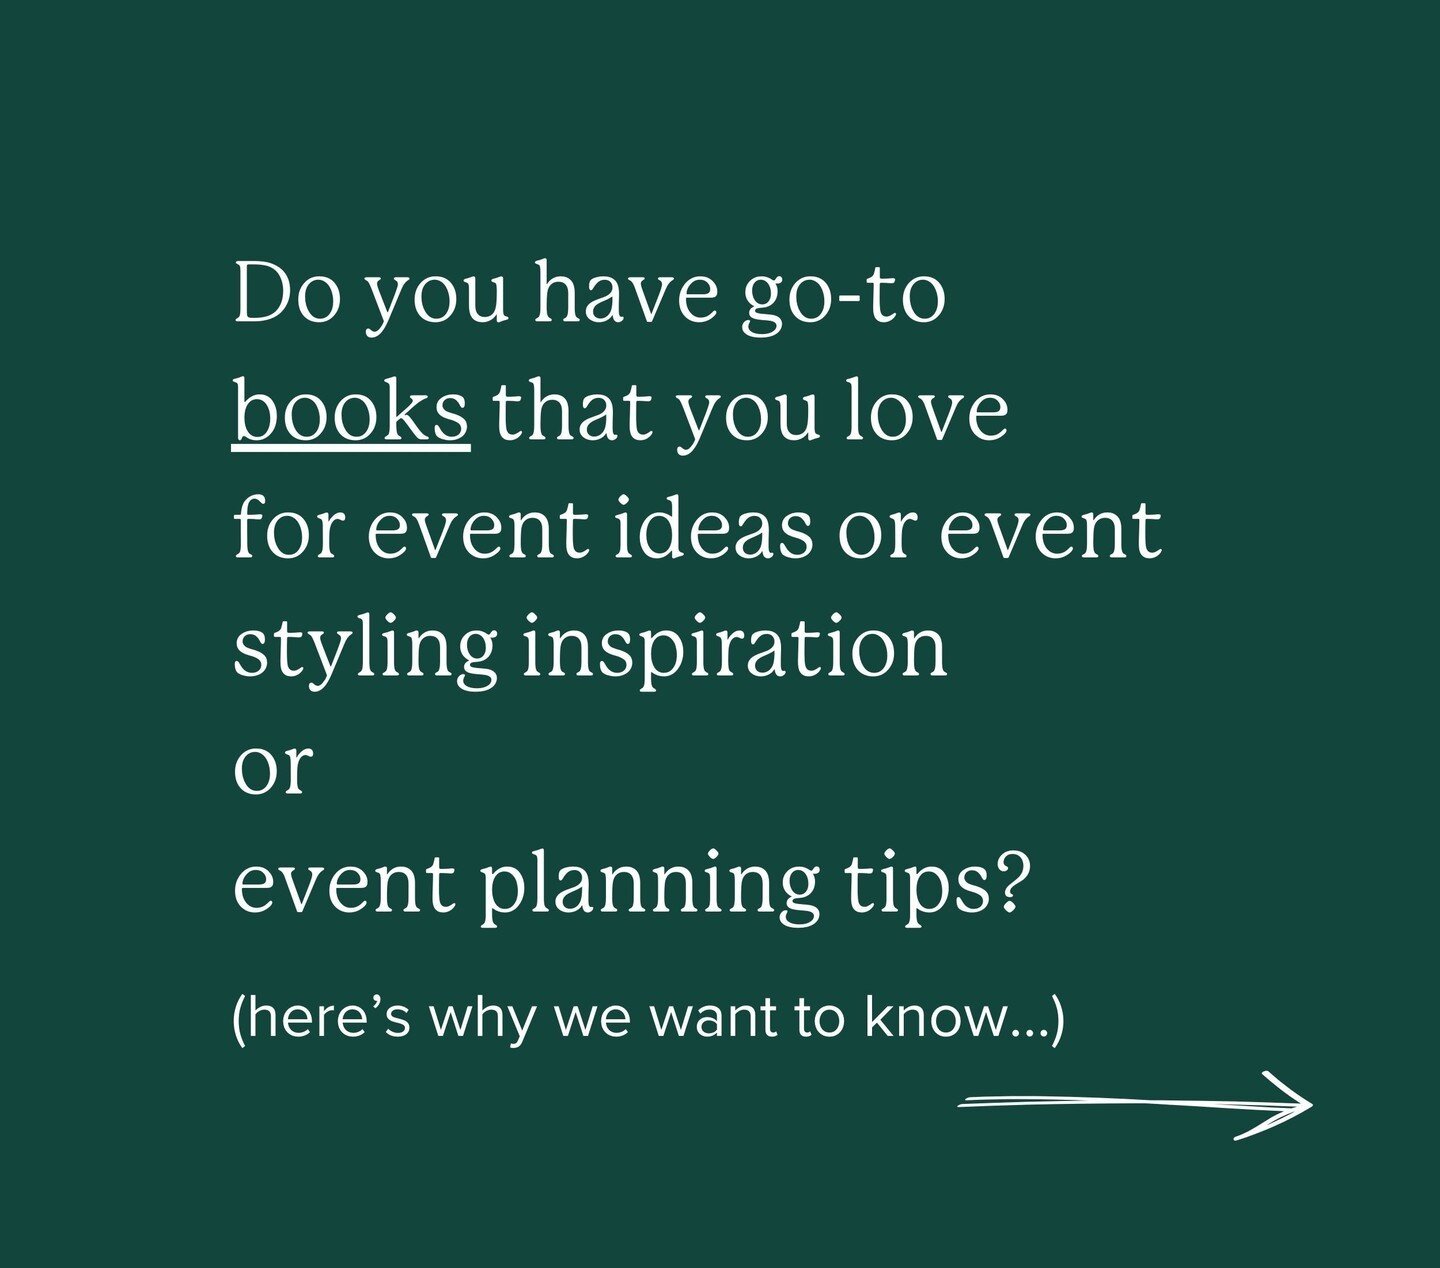 Do you have go-to books that you love for event ideas or event styling inspiration or event planning tips? 

We&rsquo;ve curated a selection of event-related books to inform and inspire our community of event planners and professionals on eventkit.co